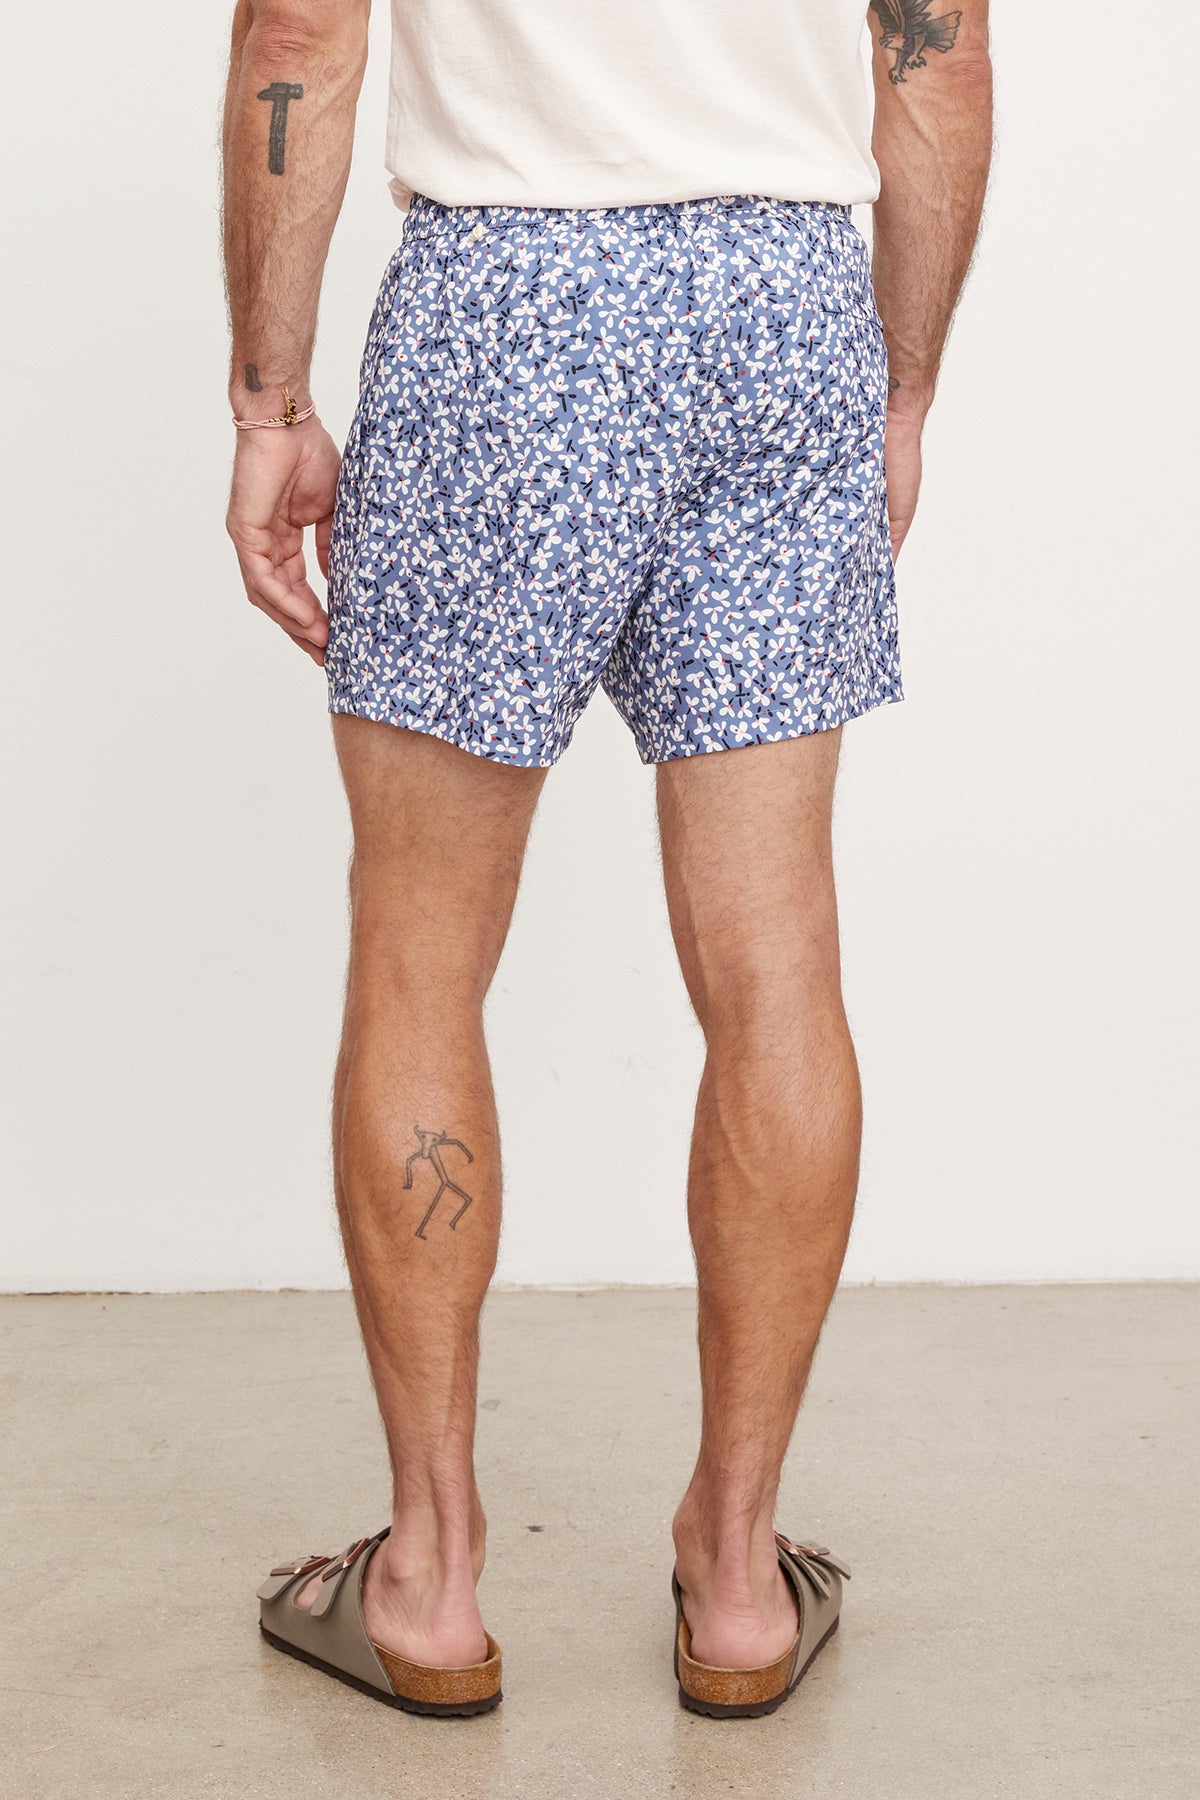   Man in Velvet by Graham & Spencer's RICARDO SWIM SHORT and brown flip-flops, standing with his back to the camera, displaying a tattoo on his right calf. 